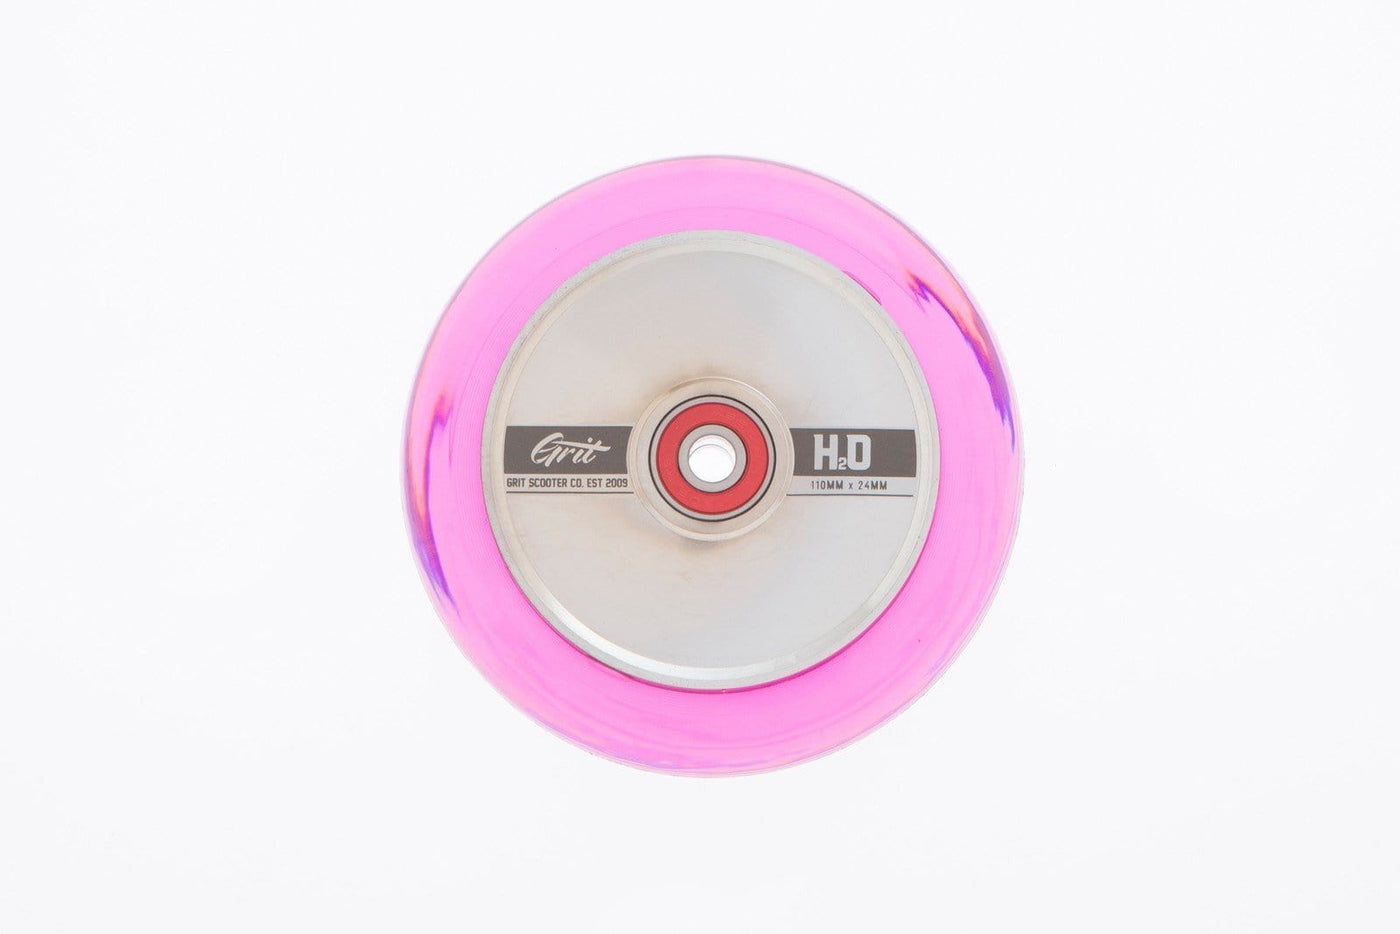 Grit Scooters Hollow Core Wheels H2O 110mm x 24mm Silver / Pink (Pair) Grit Scooters